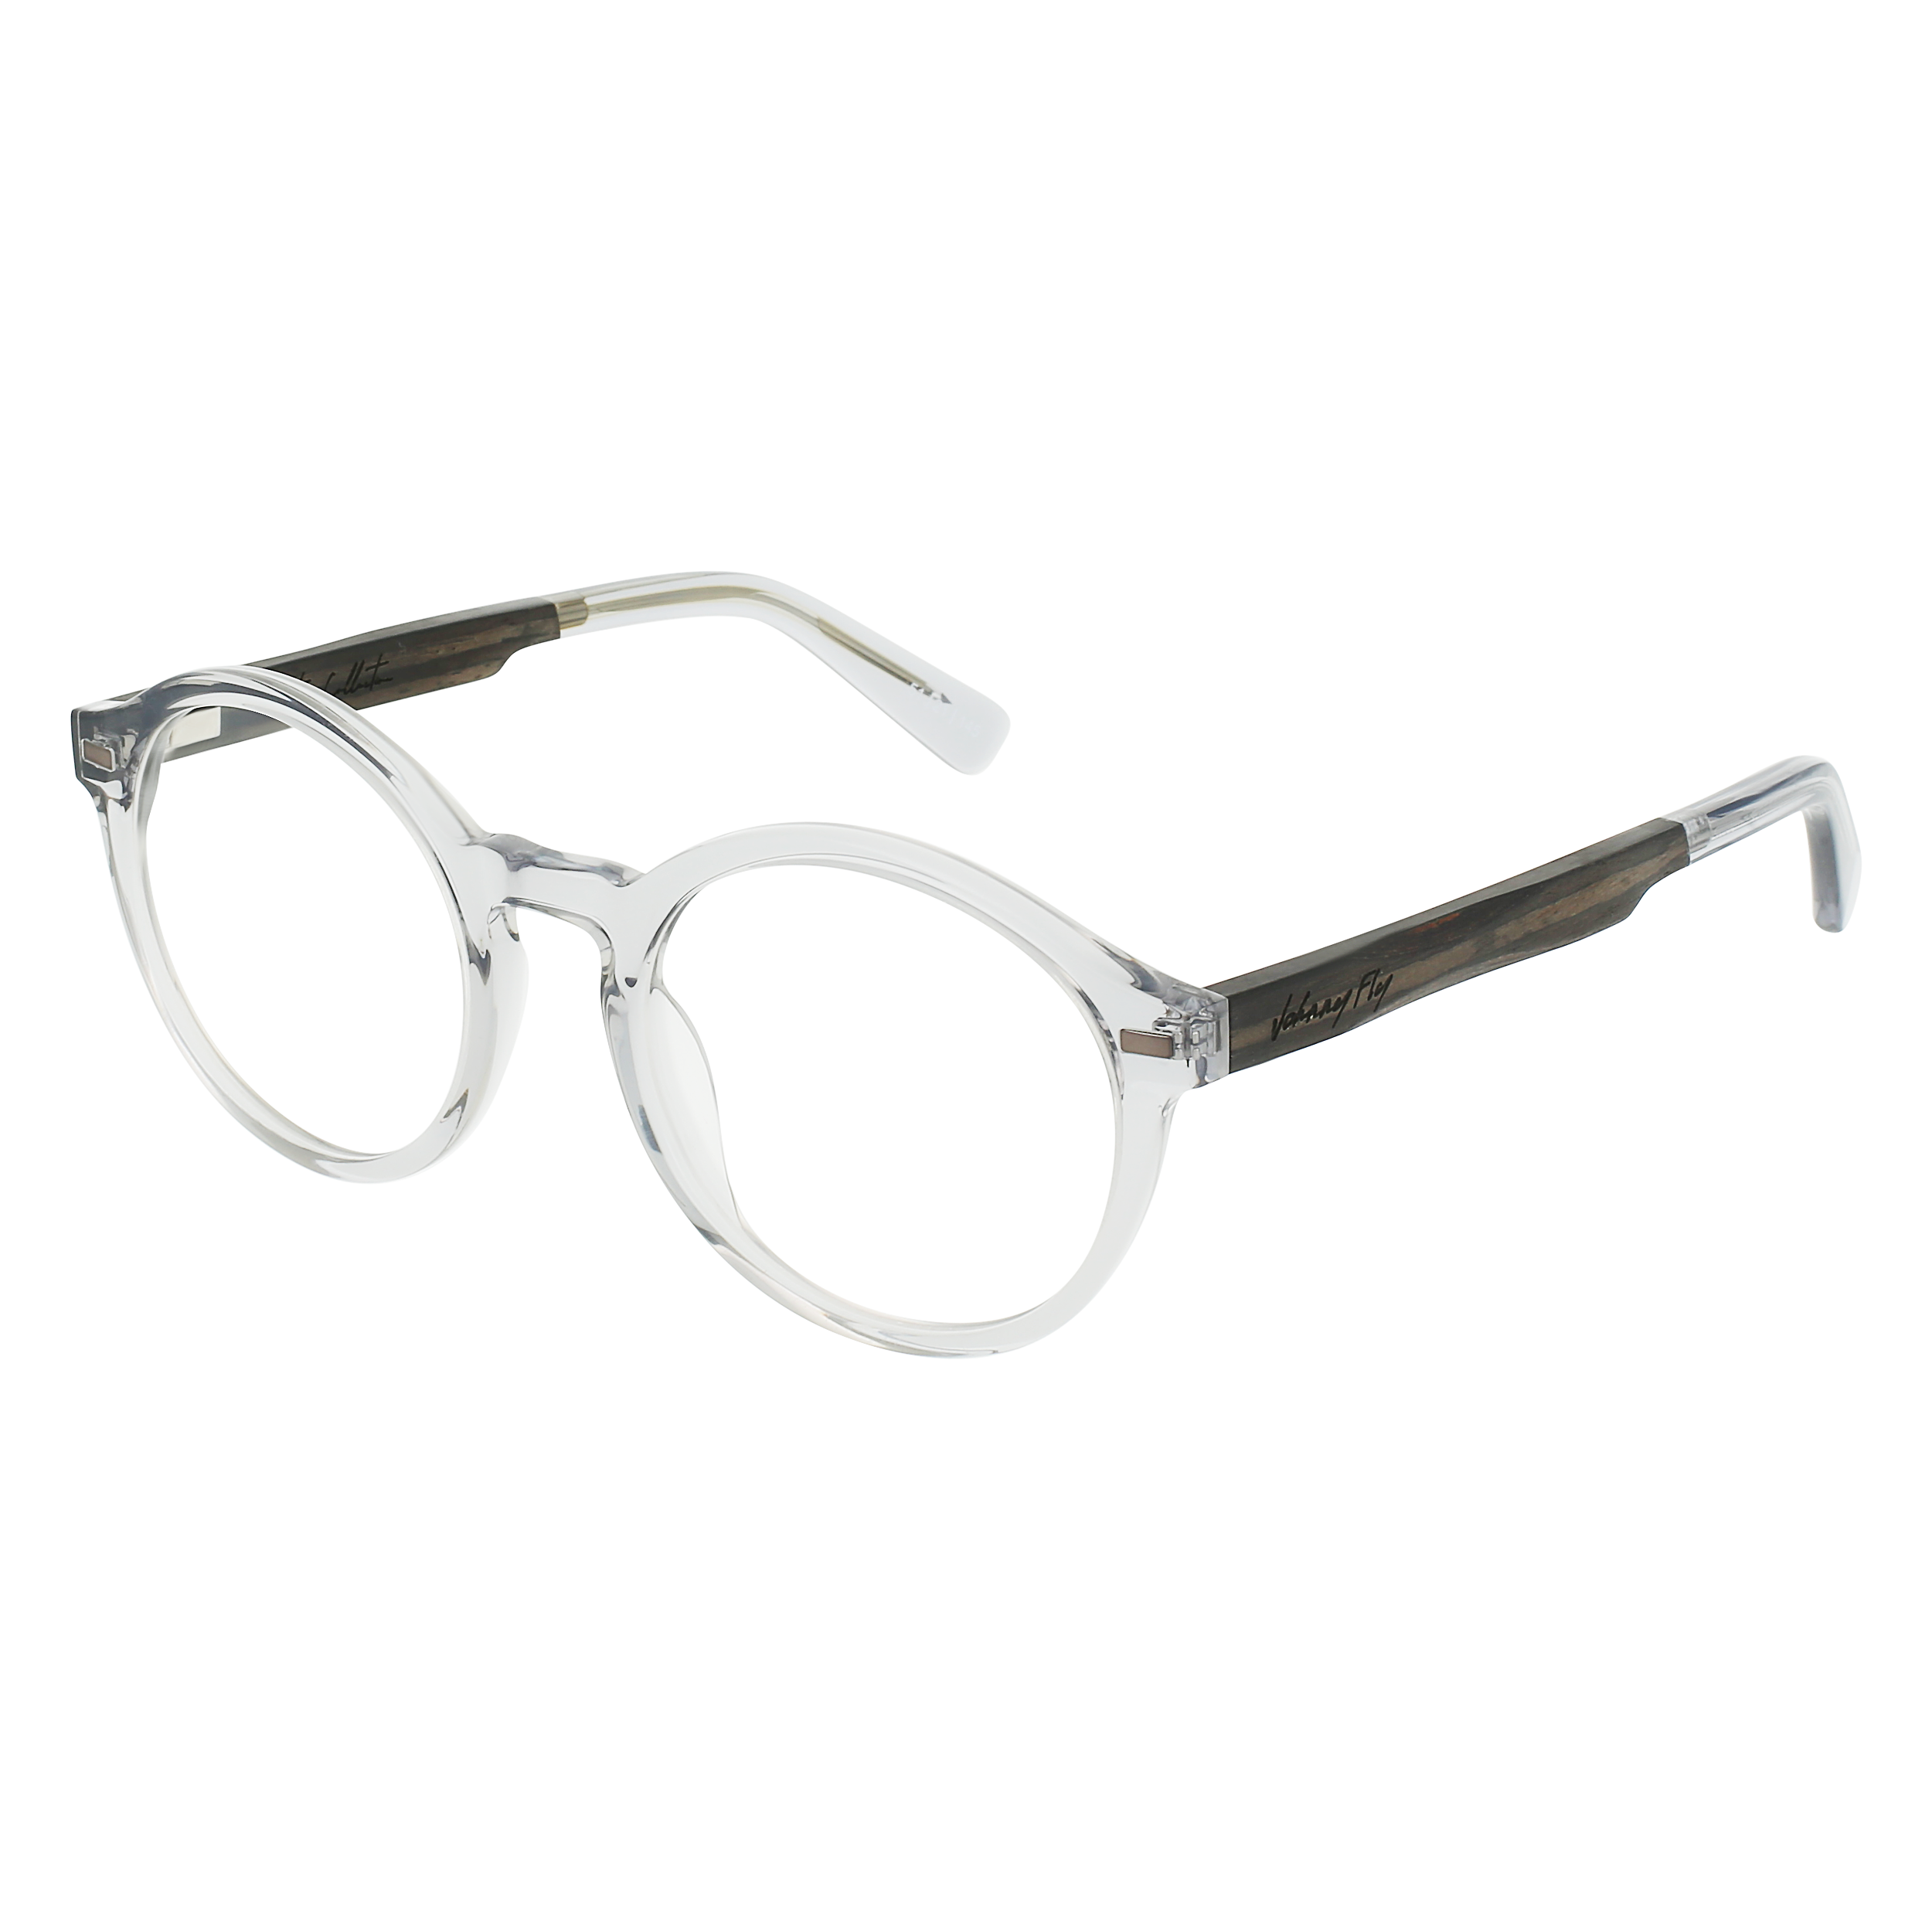 UFO Eyeglasses Frame - Tinted Crystal- Johnny Fly | UFO-TCRY-RX-BWAL | | 